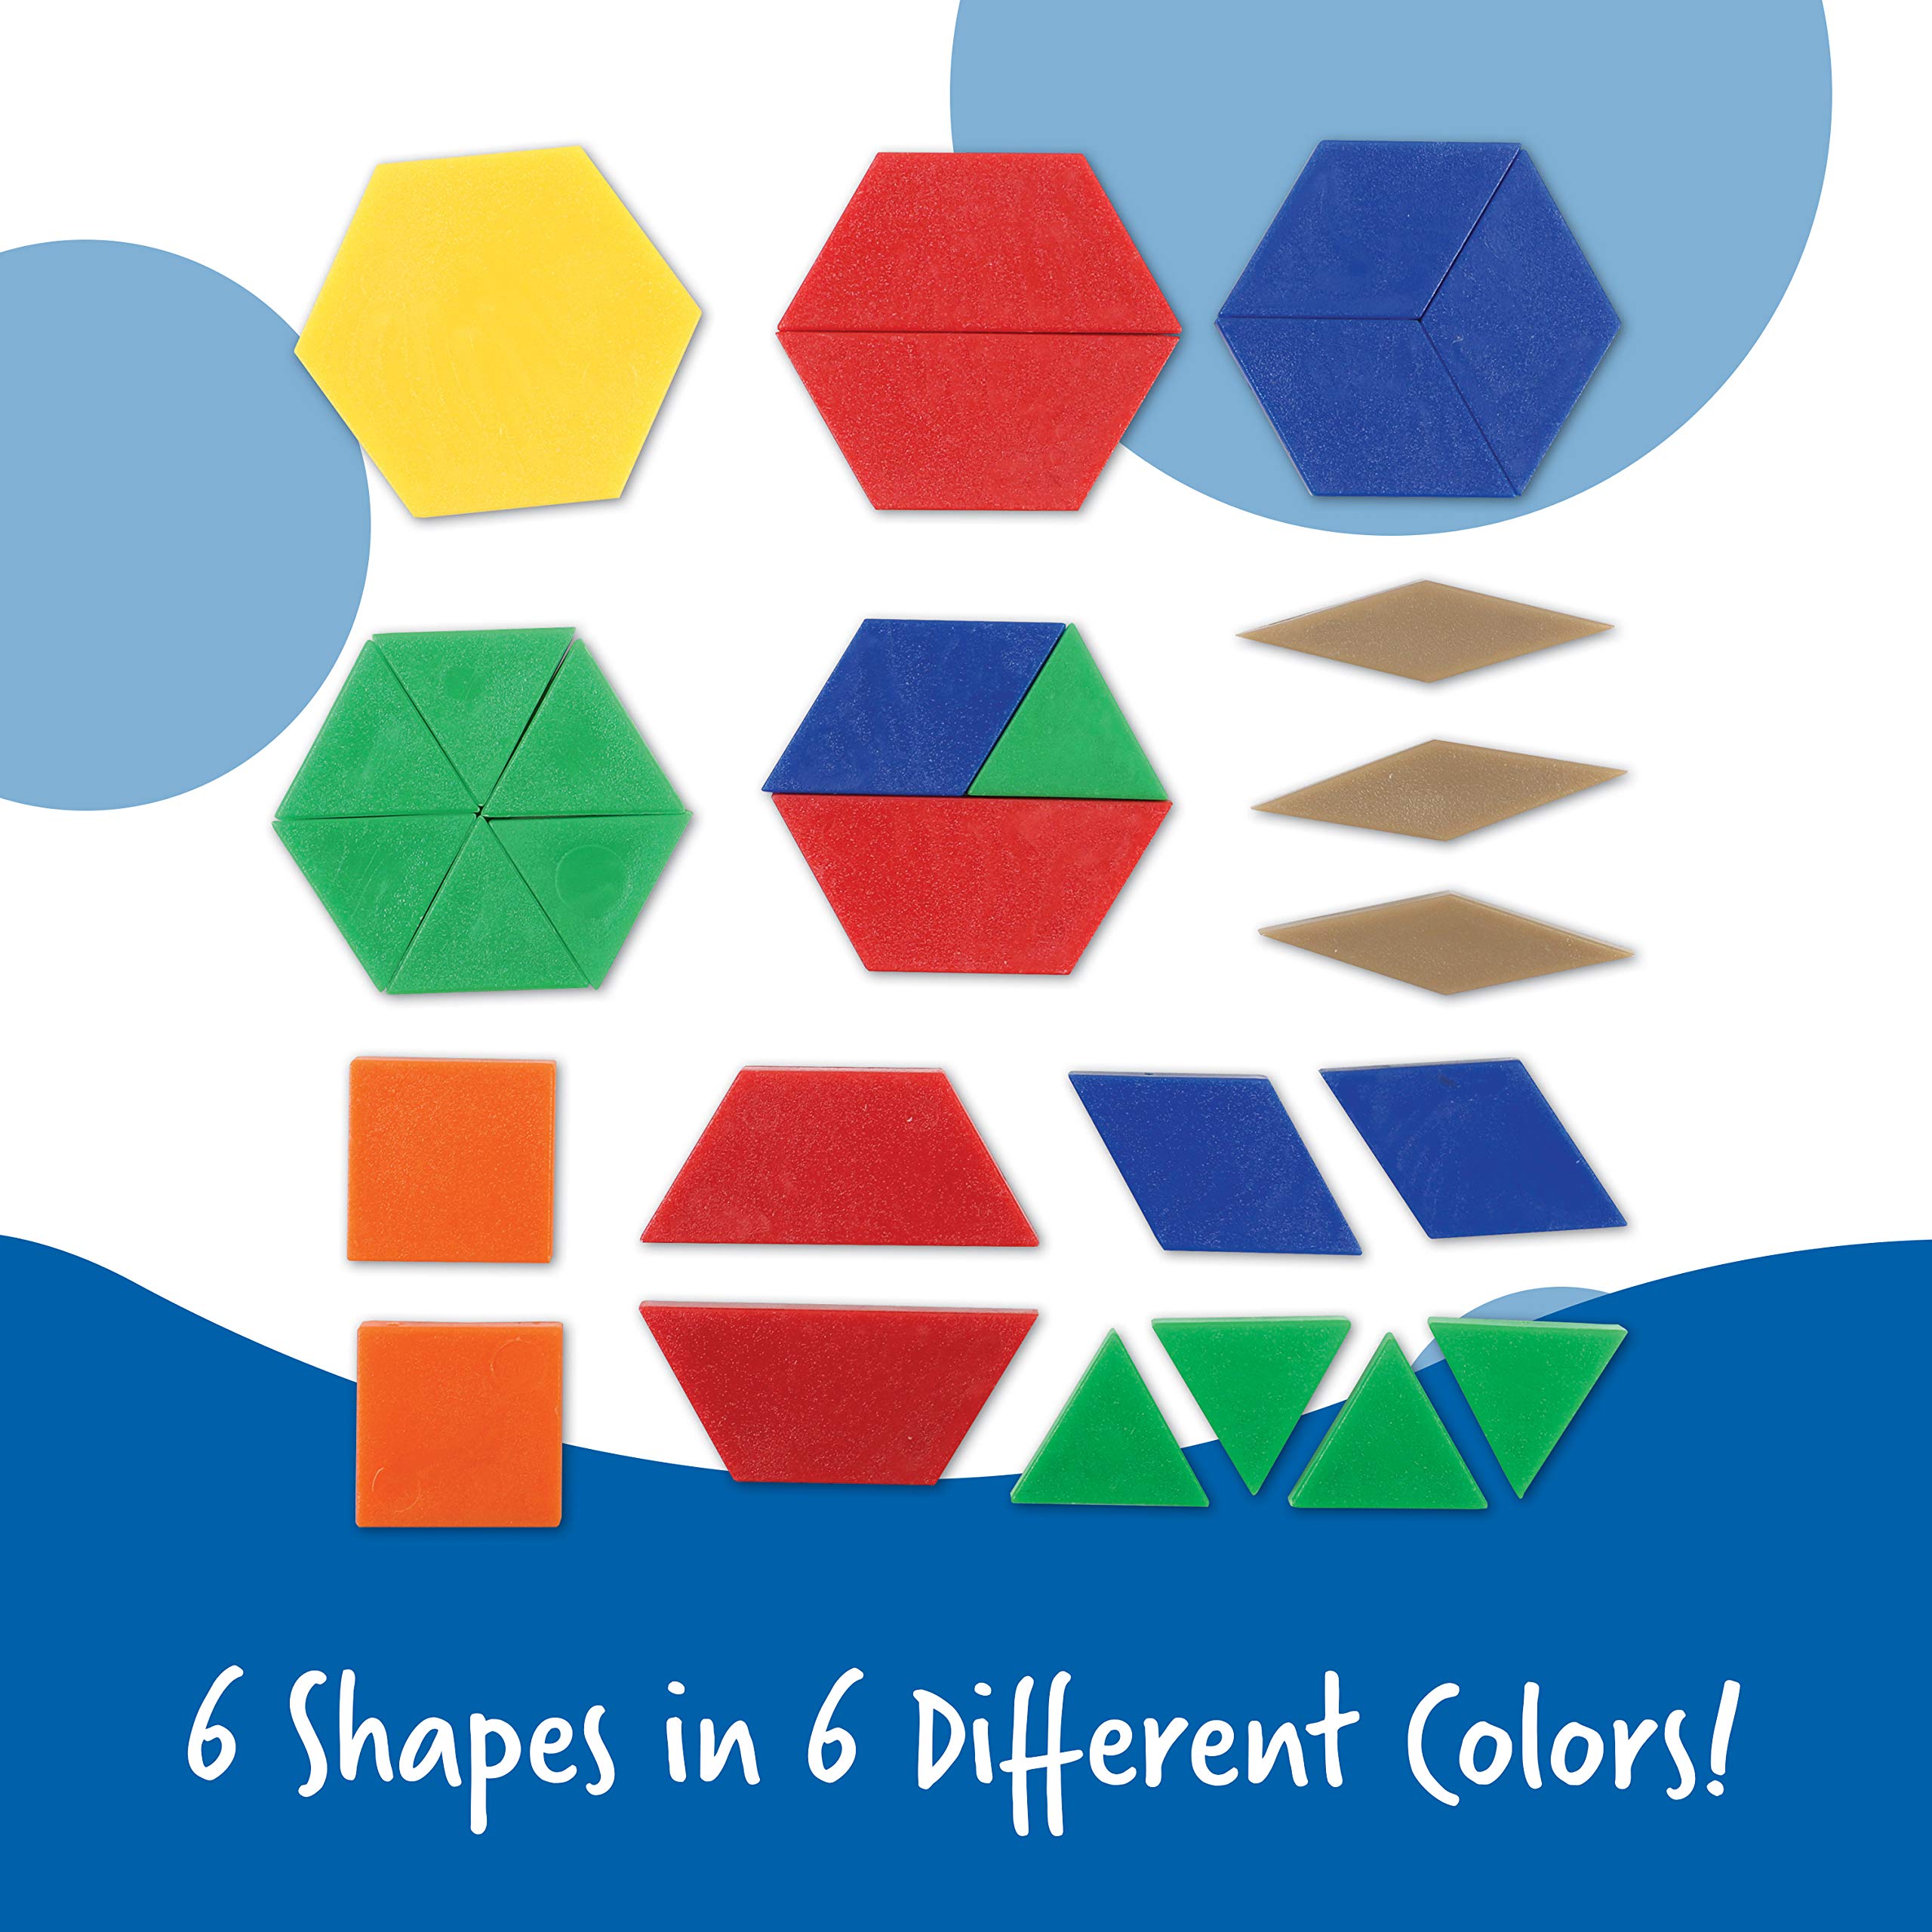 Learning Resources Plastic Pattern Blocks - Set of 250, Ages 3+, Shape Games for Preschoolers, Homeschool Supplies, Shape Manipulatives for Kids,Back to School Supplies,Teacher Supplies